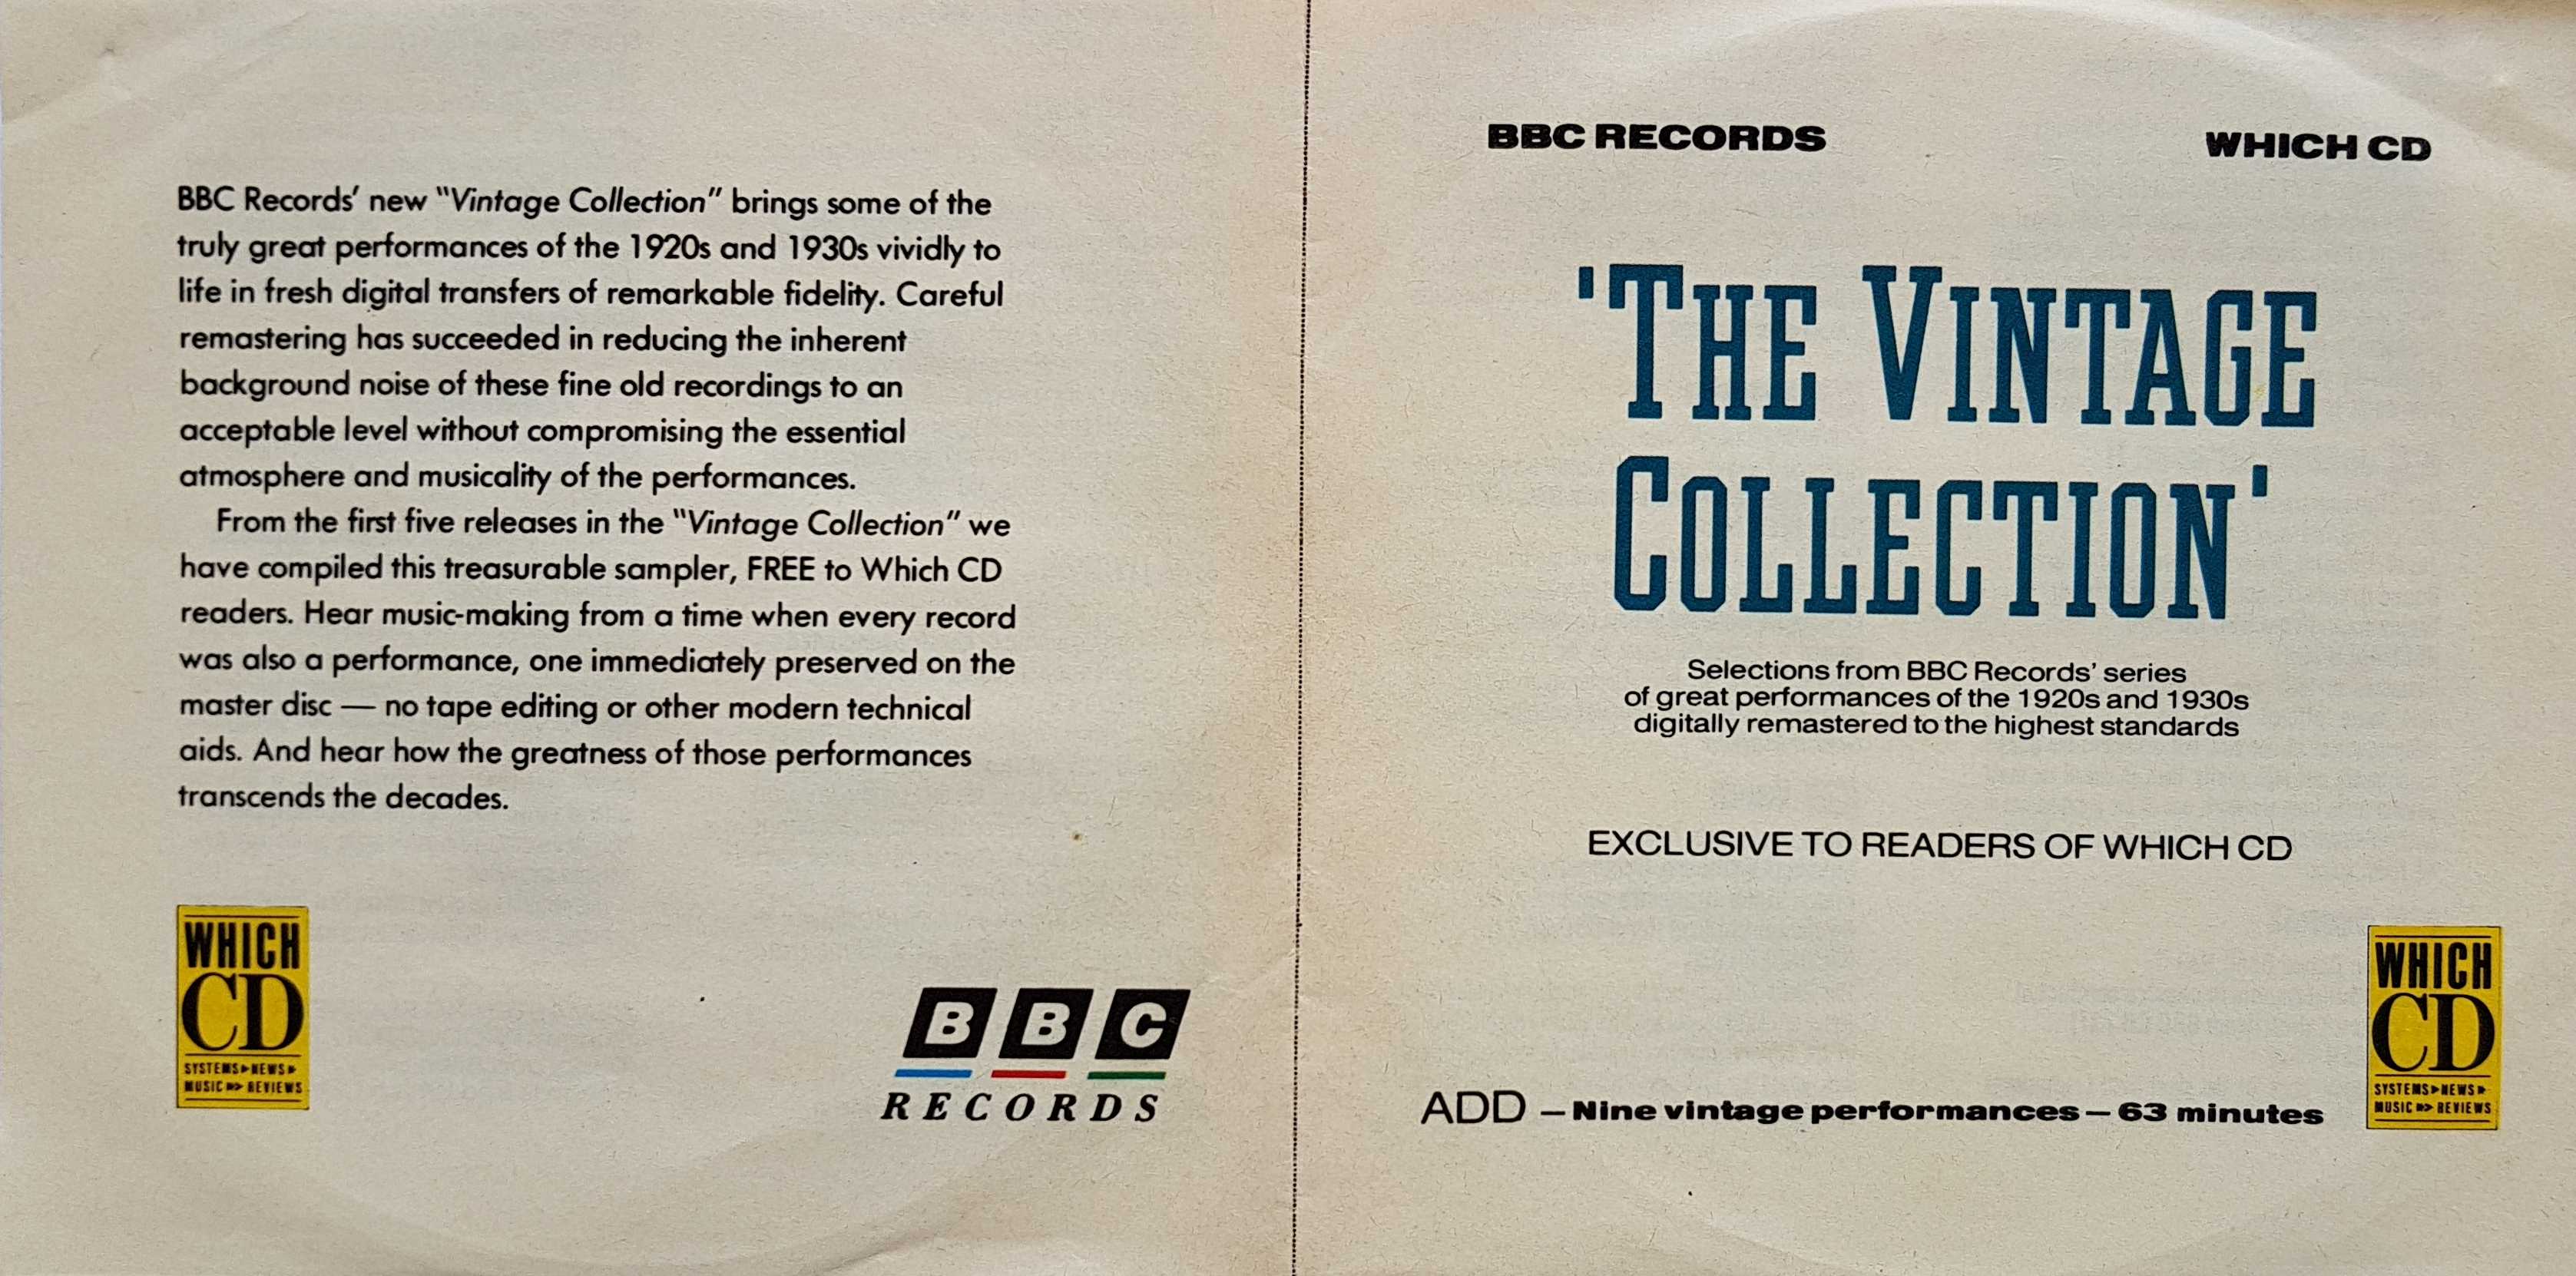 Picture of BBC WHICH CD The vintage collection by artist Various from the BBC cds - Records and Tapes library